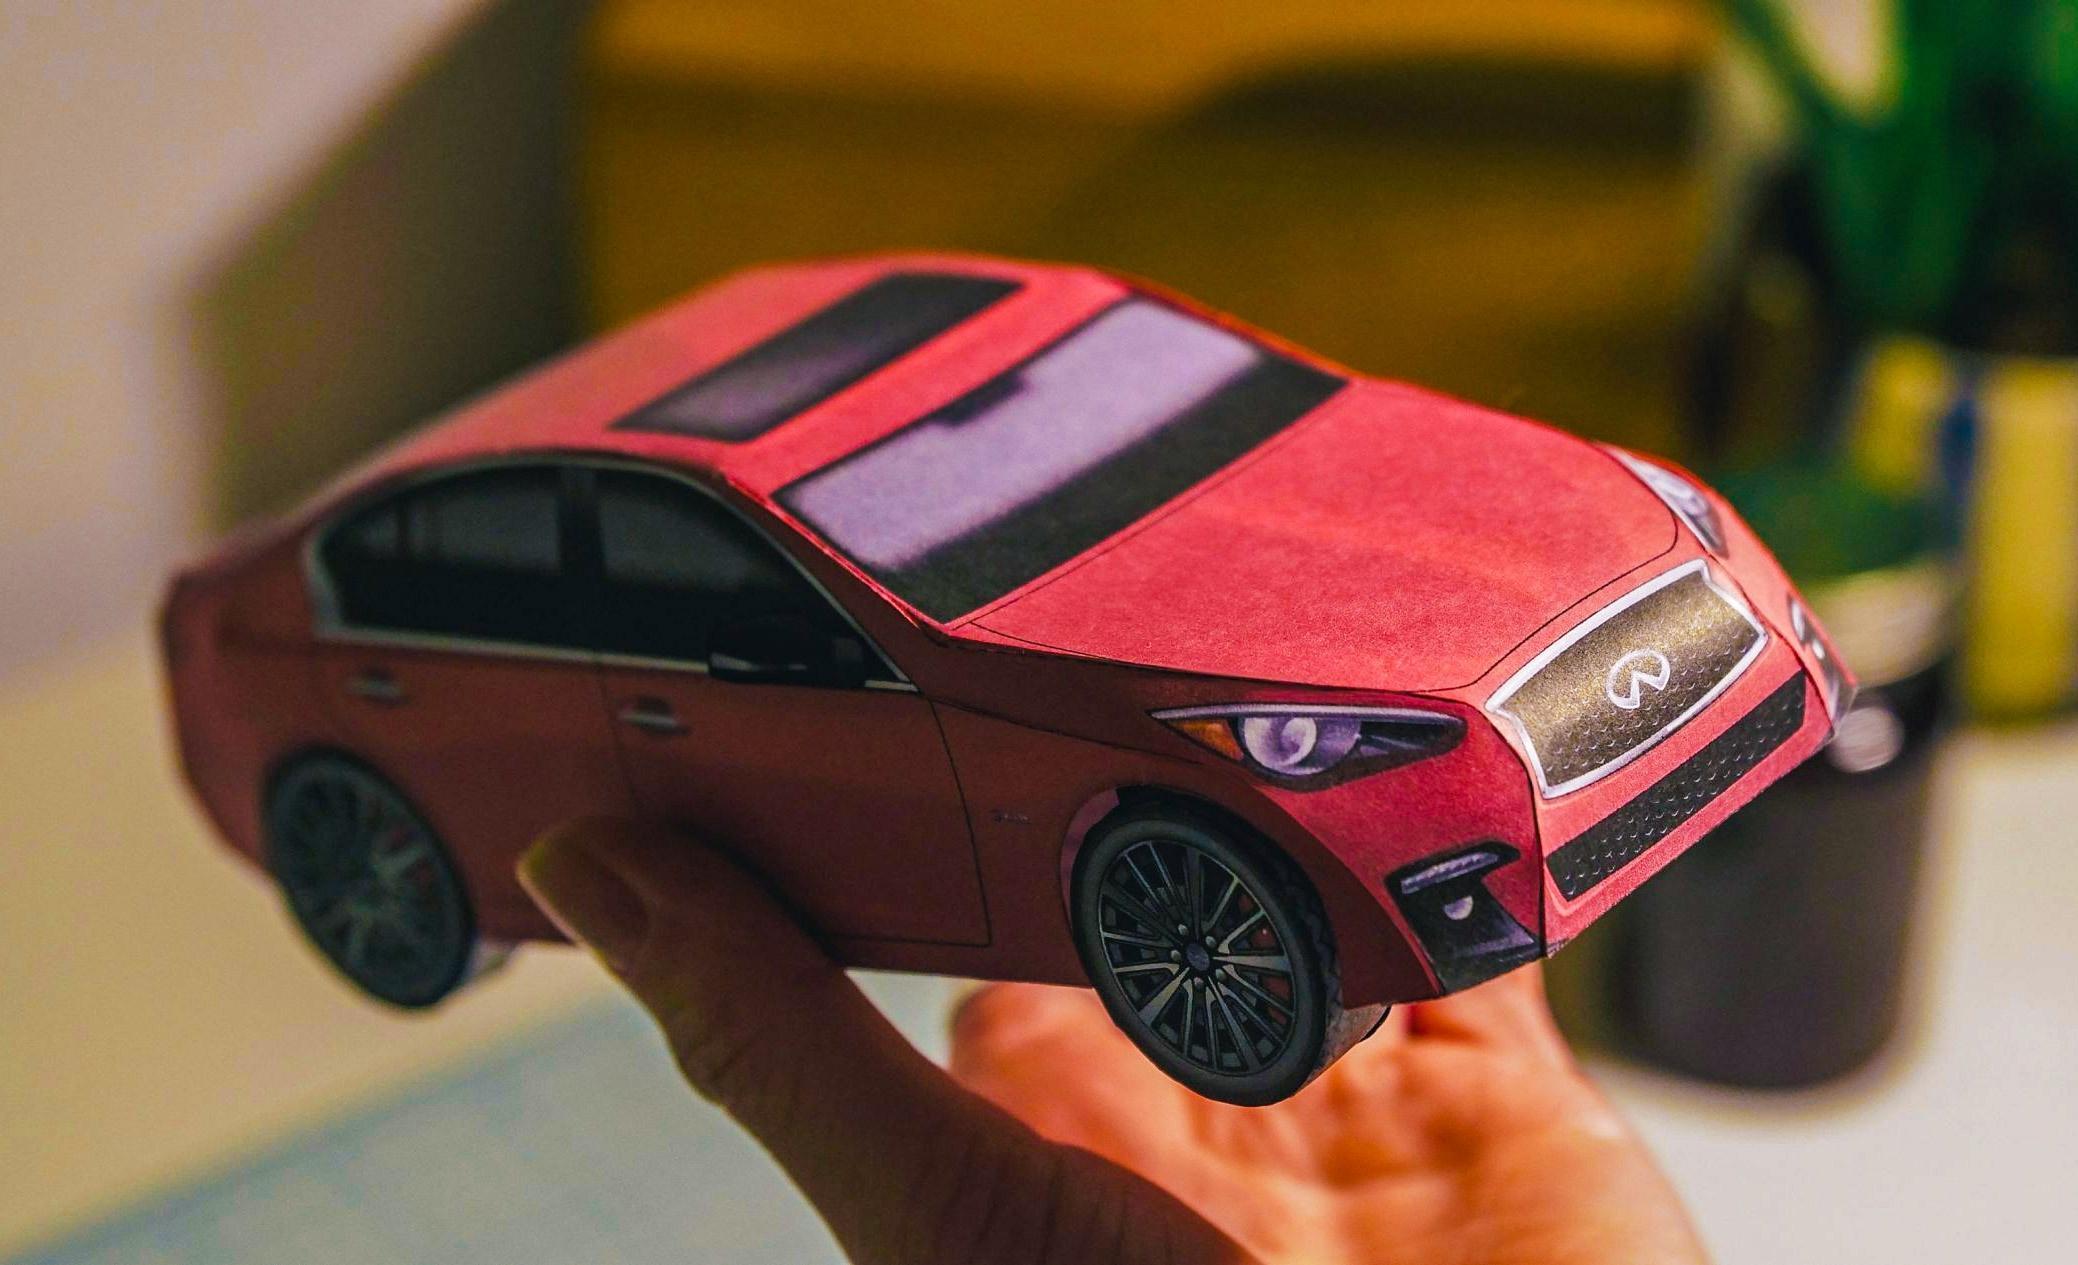 Carigami Printable Q50 Origami Car Perfect for Dads